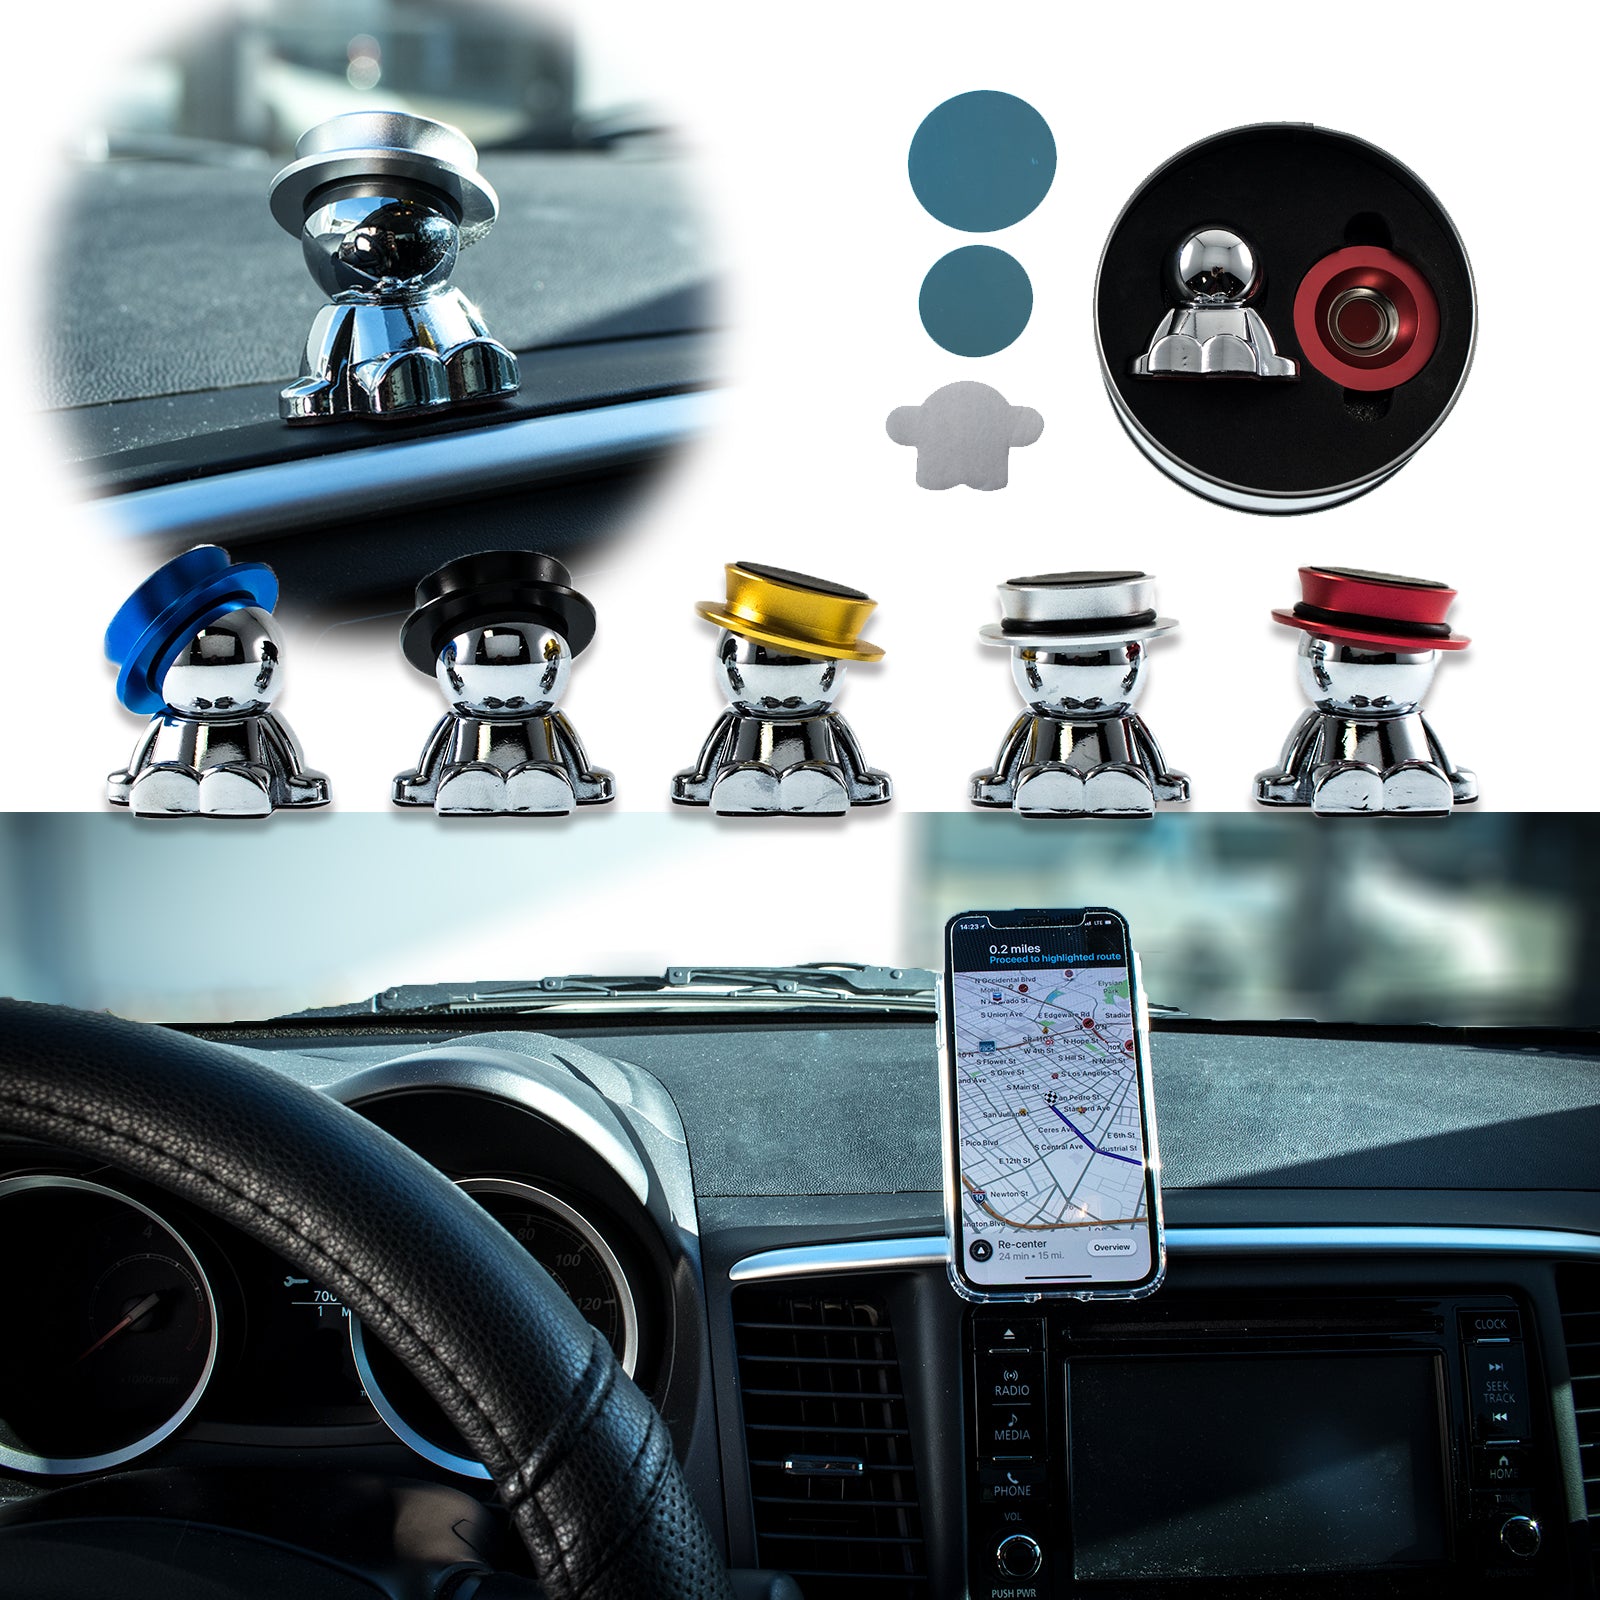 Buy CQLEK« Rugged Magnetic Car Mount, Universal Flat Stick-on Dashboard  Holder +Metal Plate/ADH-Tape for Phone iPhone X, iPhone 8 7 Plus,Galaxy s8  Note,HTC,Pixel,LG G6,GPS,Phablet (Work w/Most Case) Online at Lowest Price  Ever